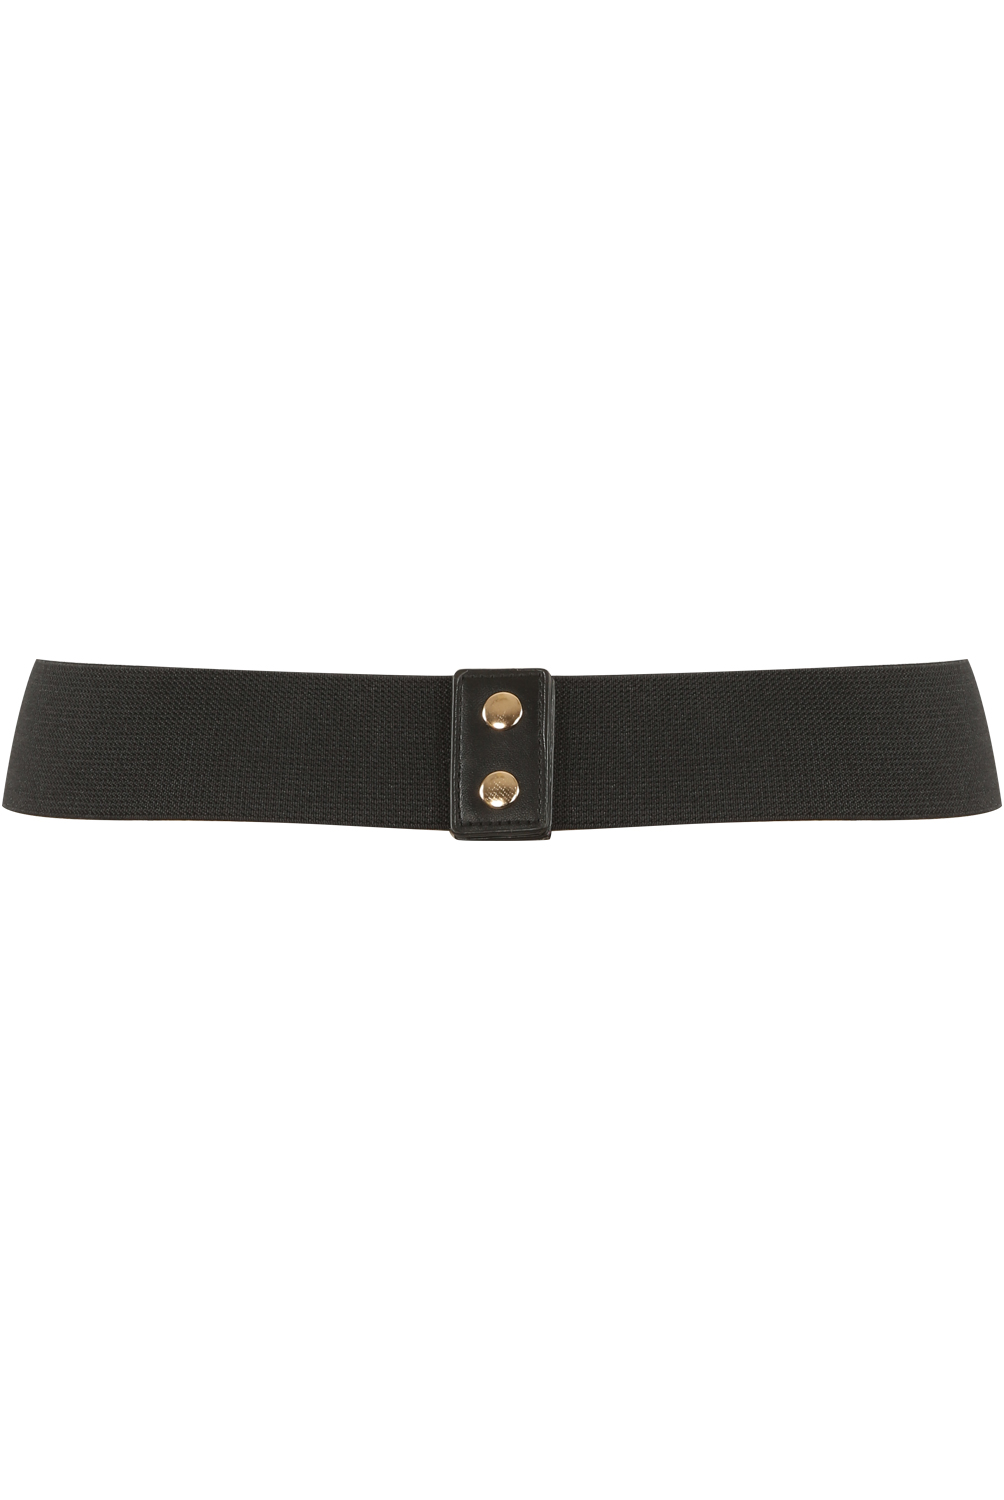 Double Chain Elasticated Waist Belt - Buy Fashion Wholesale in The UK